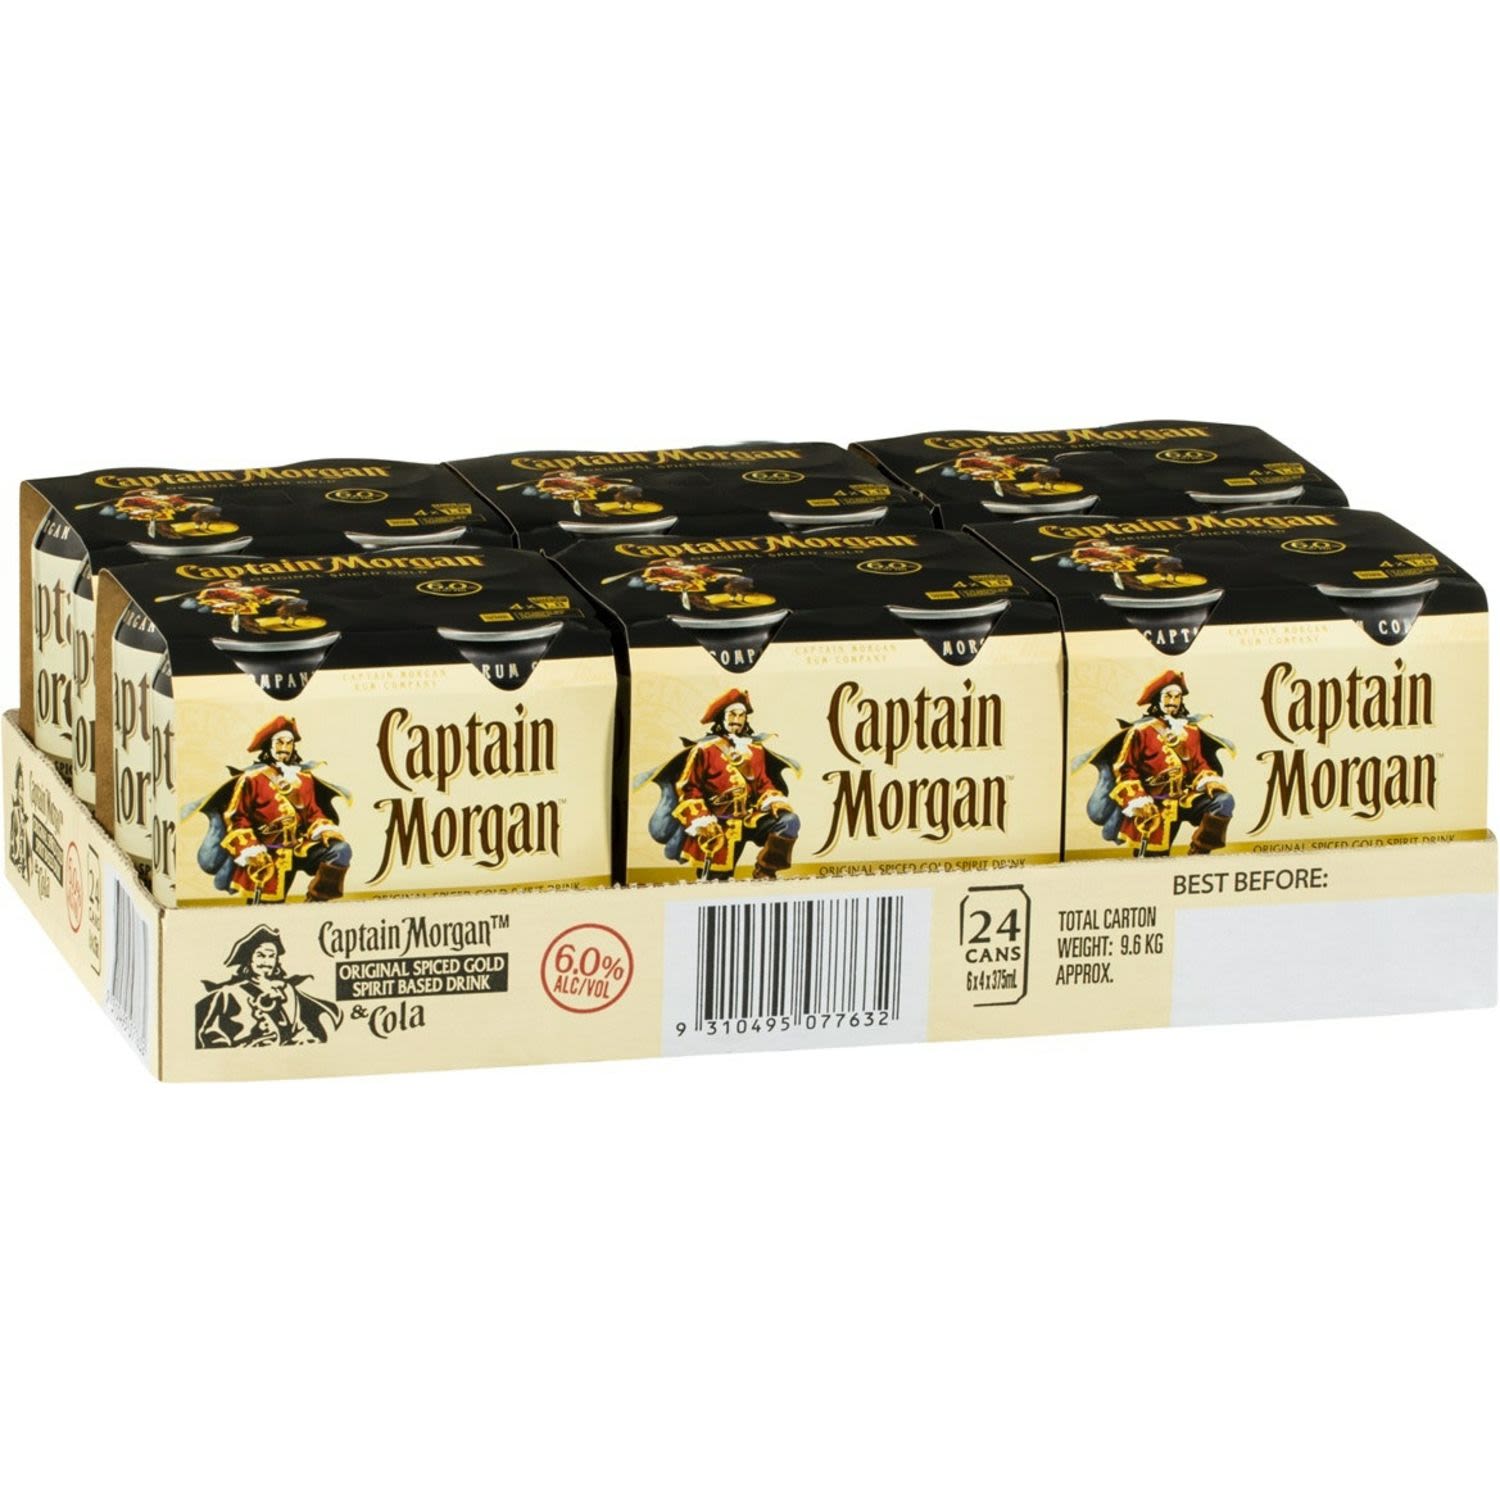 Captain Morgan Original Spiced Gold & Cola 6% Can 375mL 24 Pack